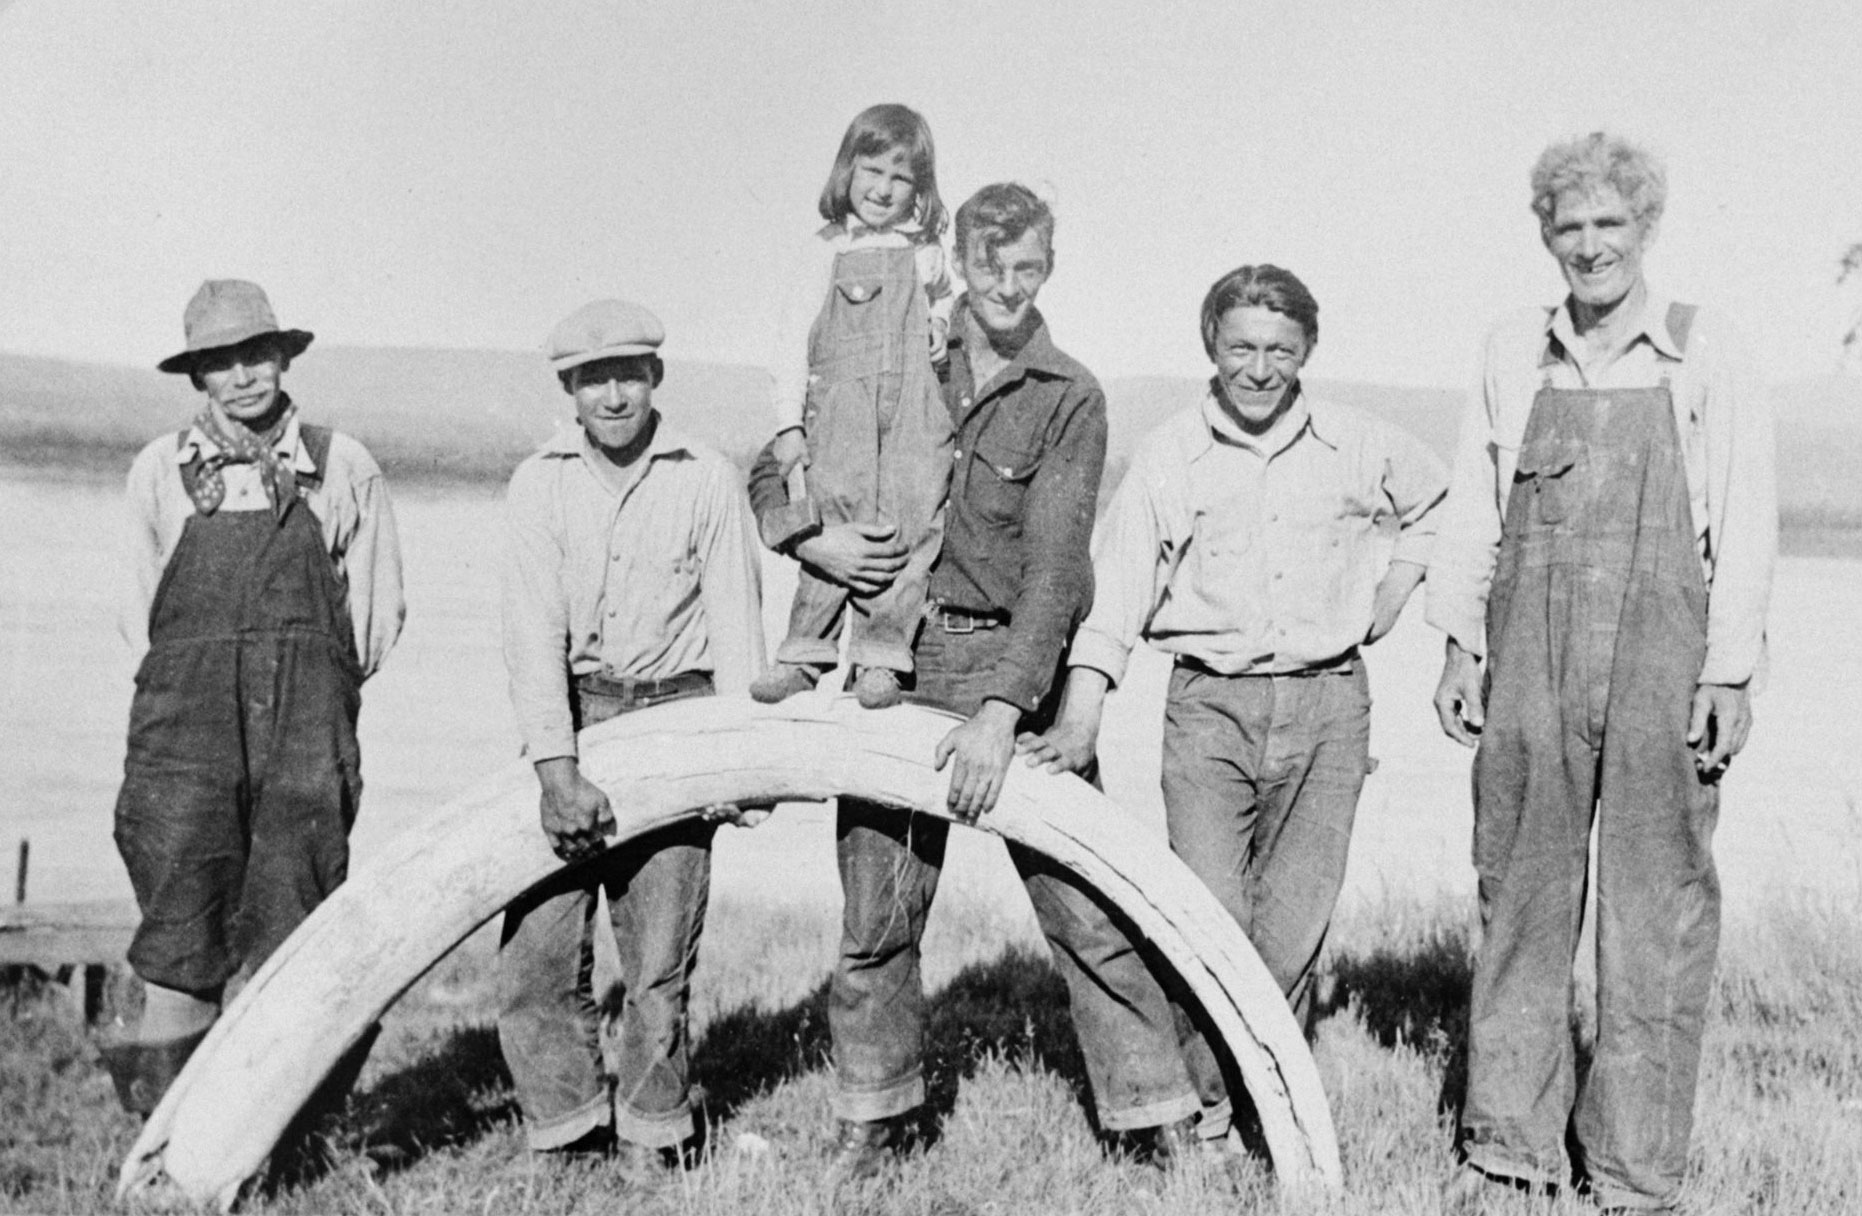 Black and white photo of five men posting with a mammoth tusk. Two of the men are holding up the tusk, which has its base and tip resting on the ground. The man in the center holds a little girl who is standing on the apex of the arch formed by the tusk. 